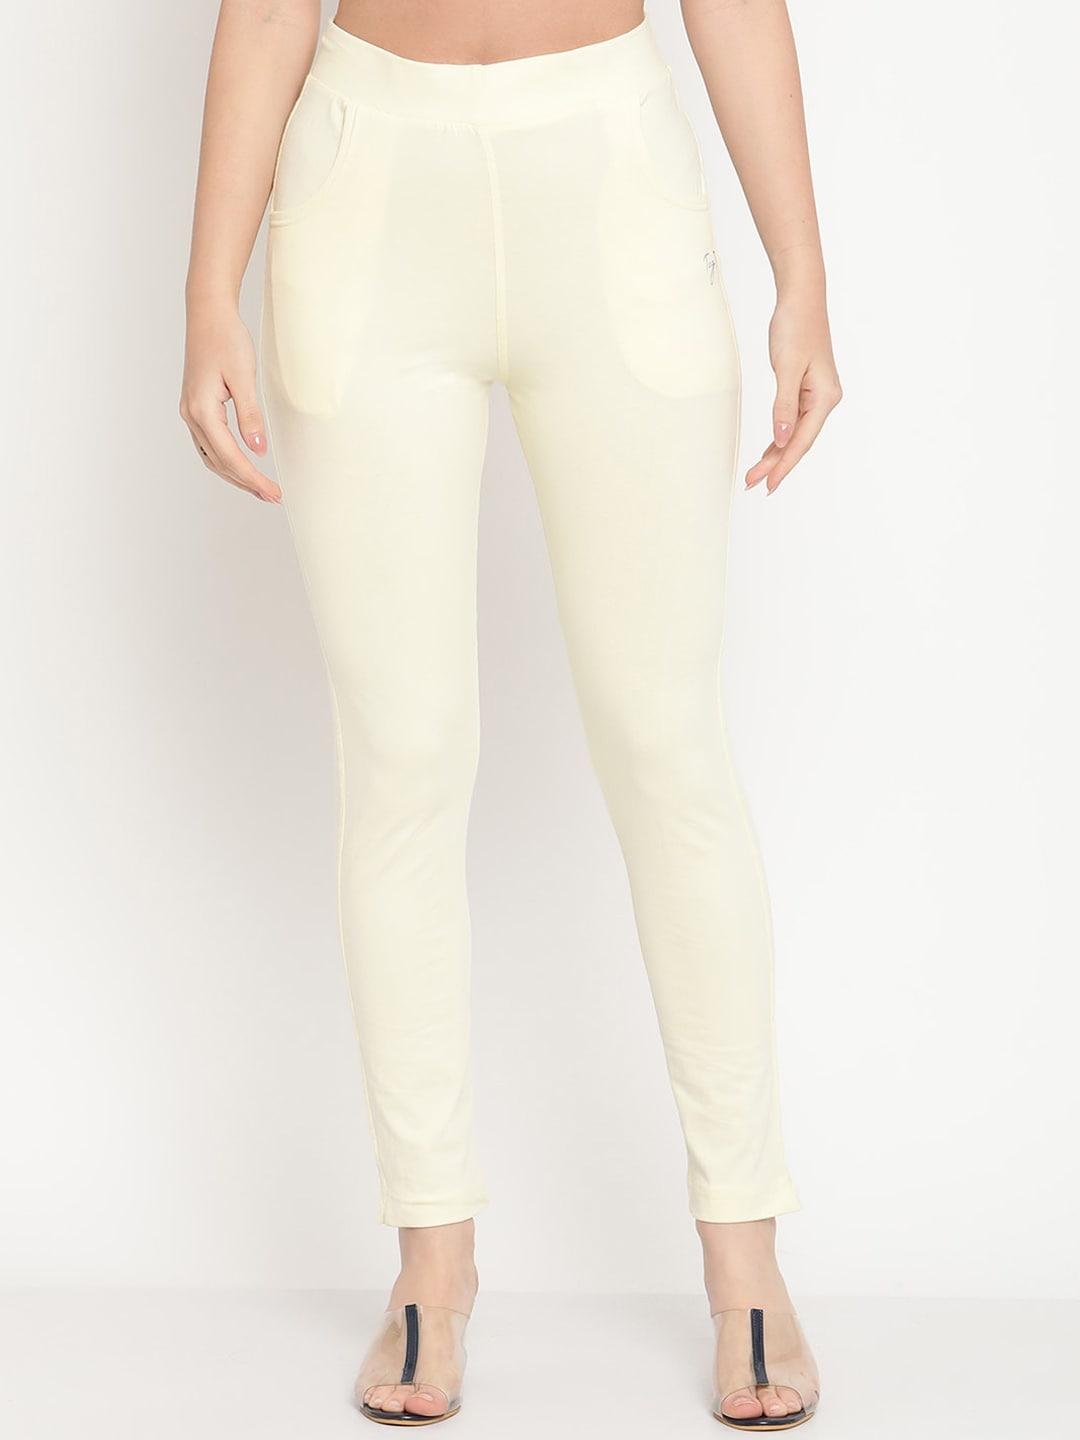 tag 7 women off-white solid ankle length leggings